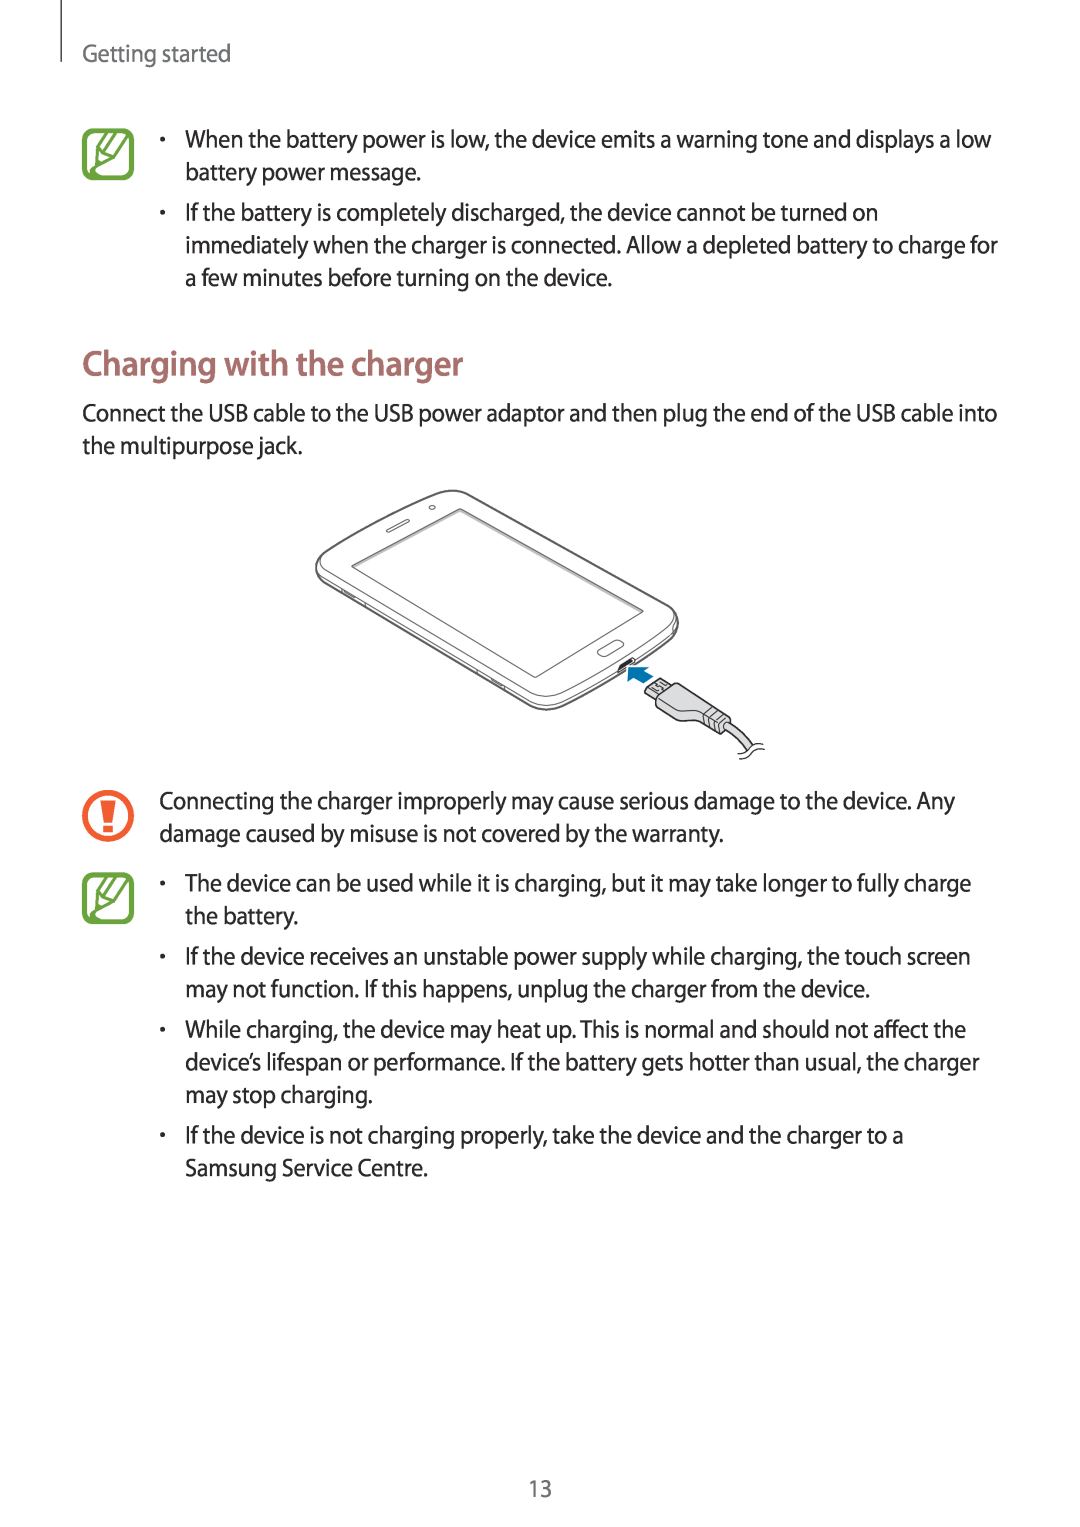 Samsung GT-N5100 user manual Charging with the charger, Getting started 